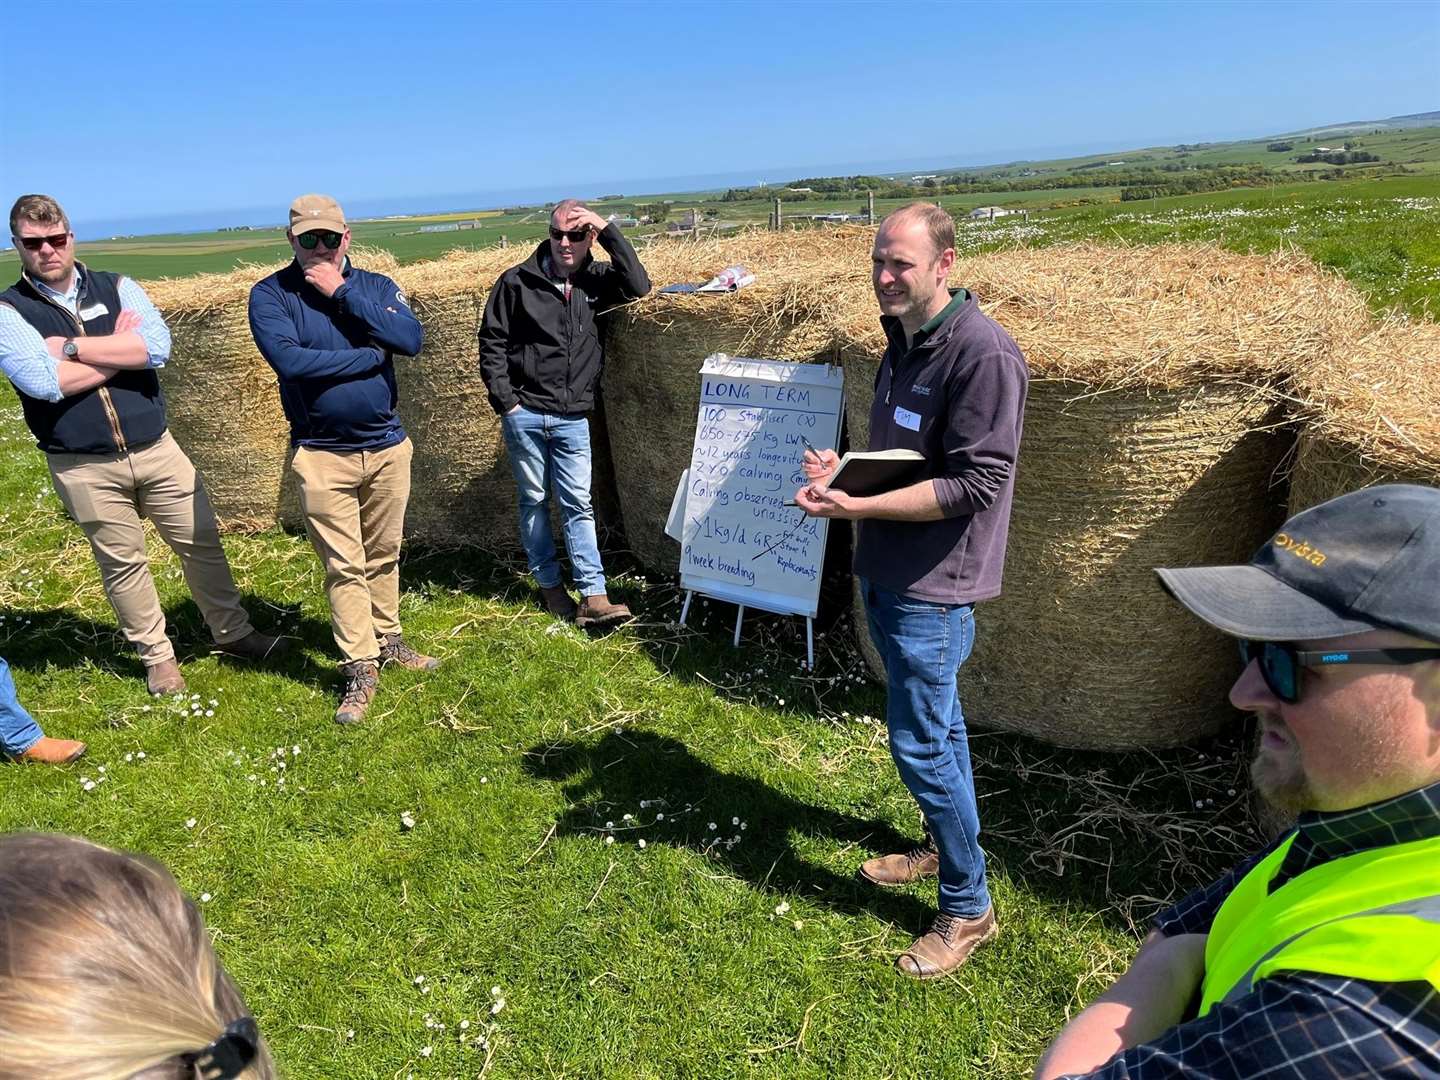 SRUC vet Tim Geraghty talks through some of the key points about selecting and managing replacement heifers.